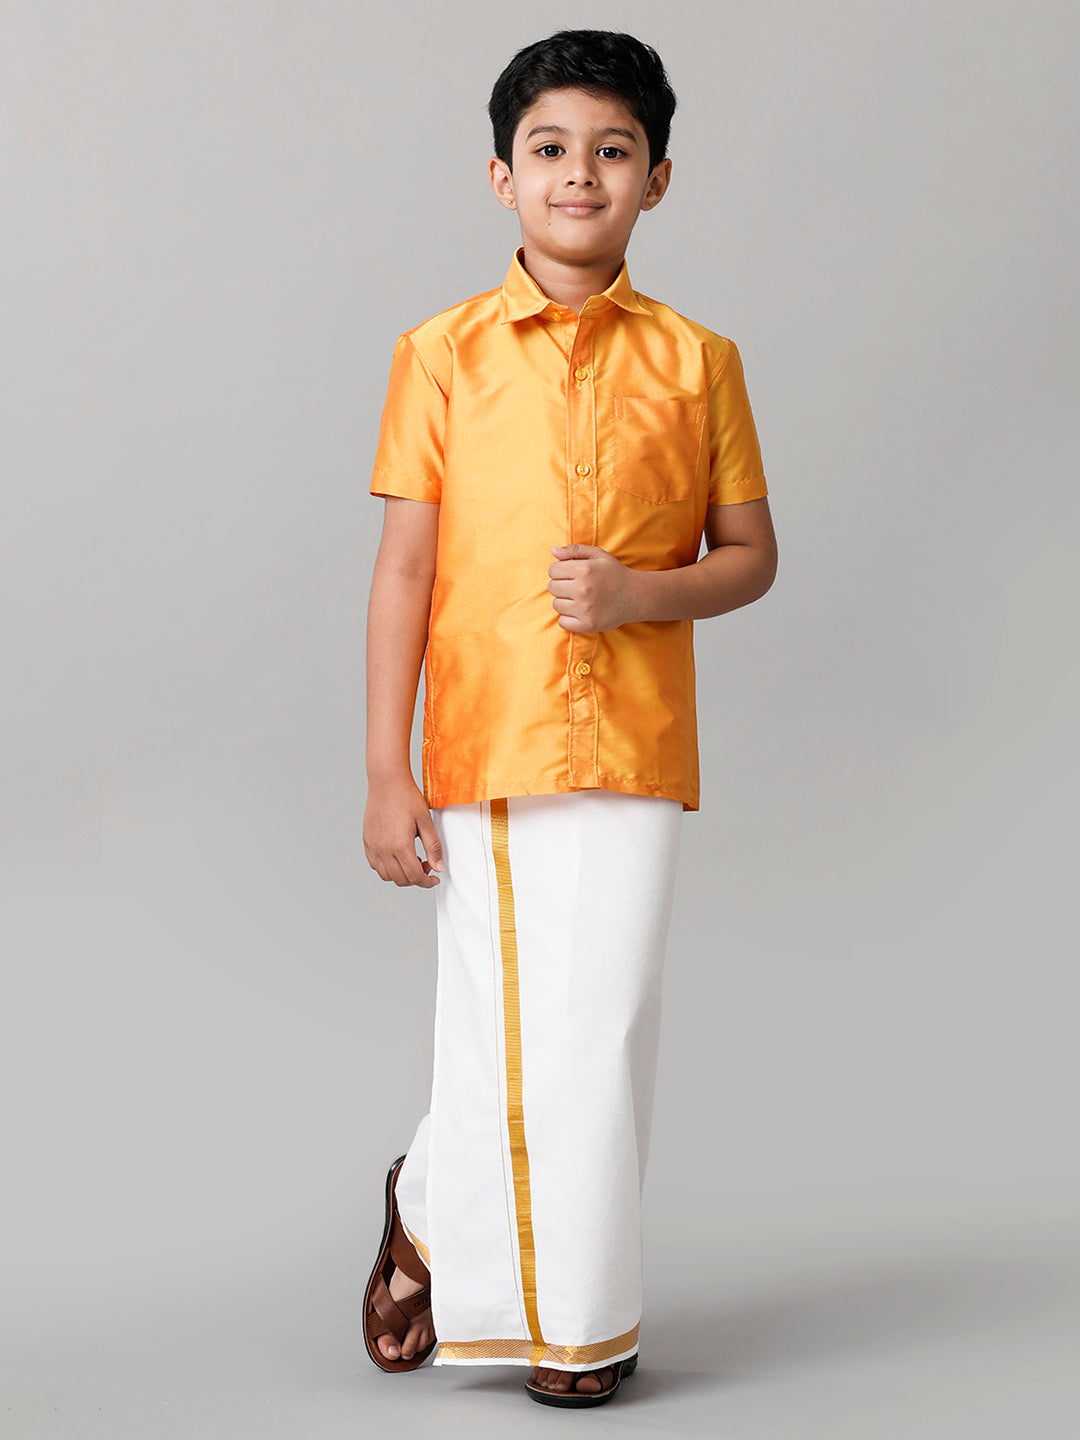 Boys Silk Cotton Yellow Half Sleeves Shirt with Adjustable White Dhoti Combo K6-Front view